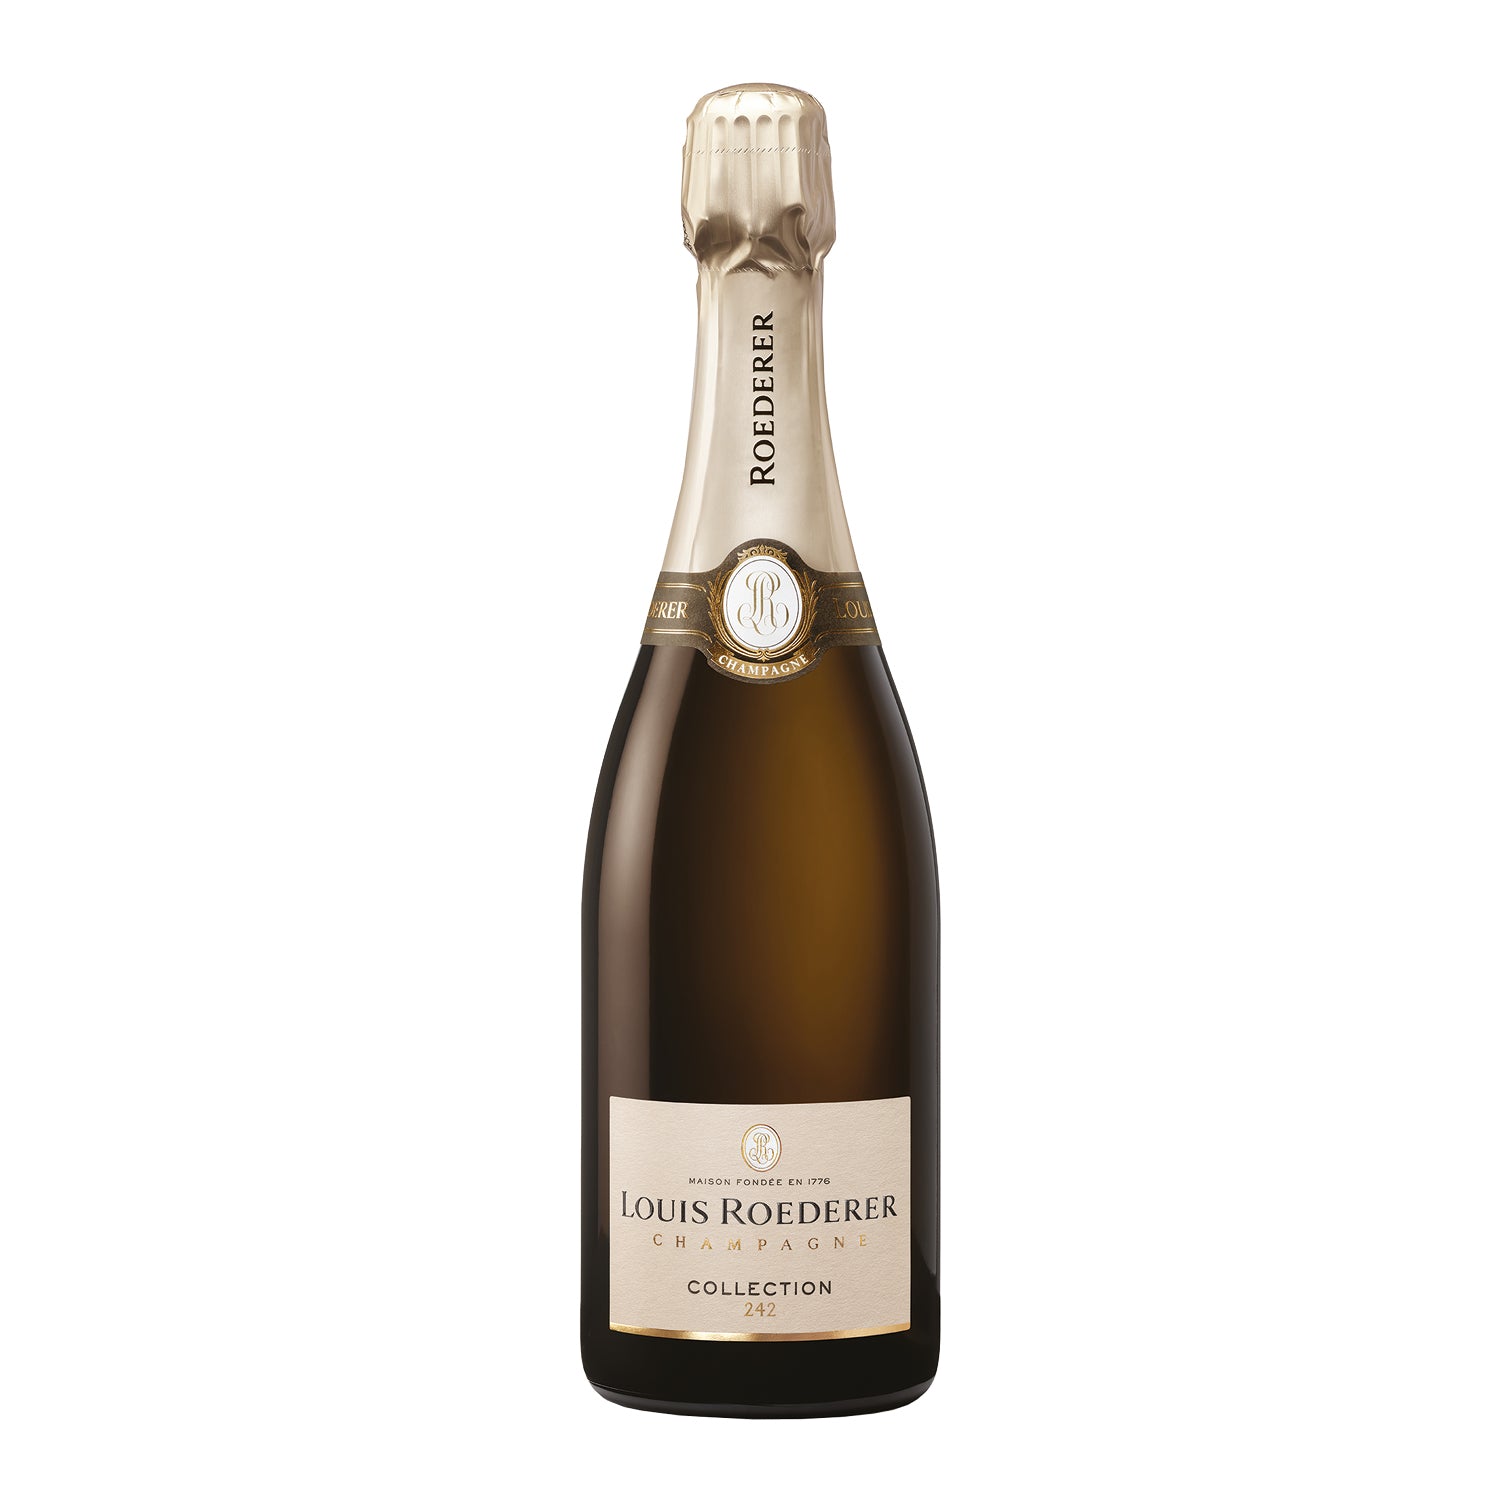 LOUIS ROEDERER COLLECTION GIFT BOX 750ML